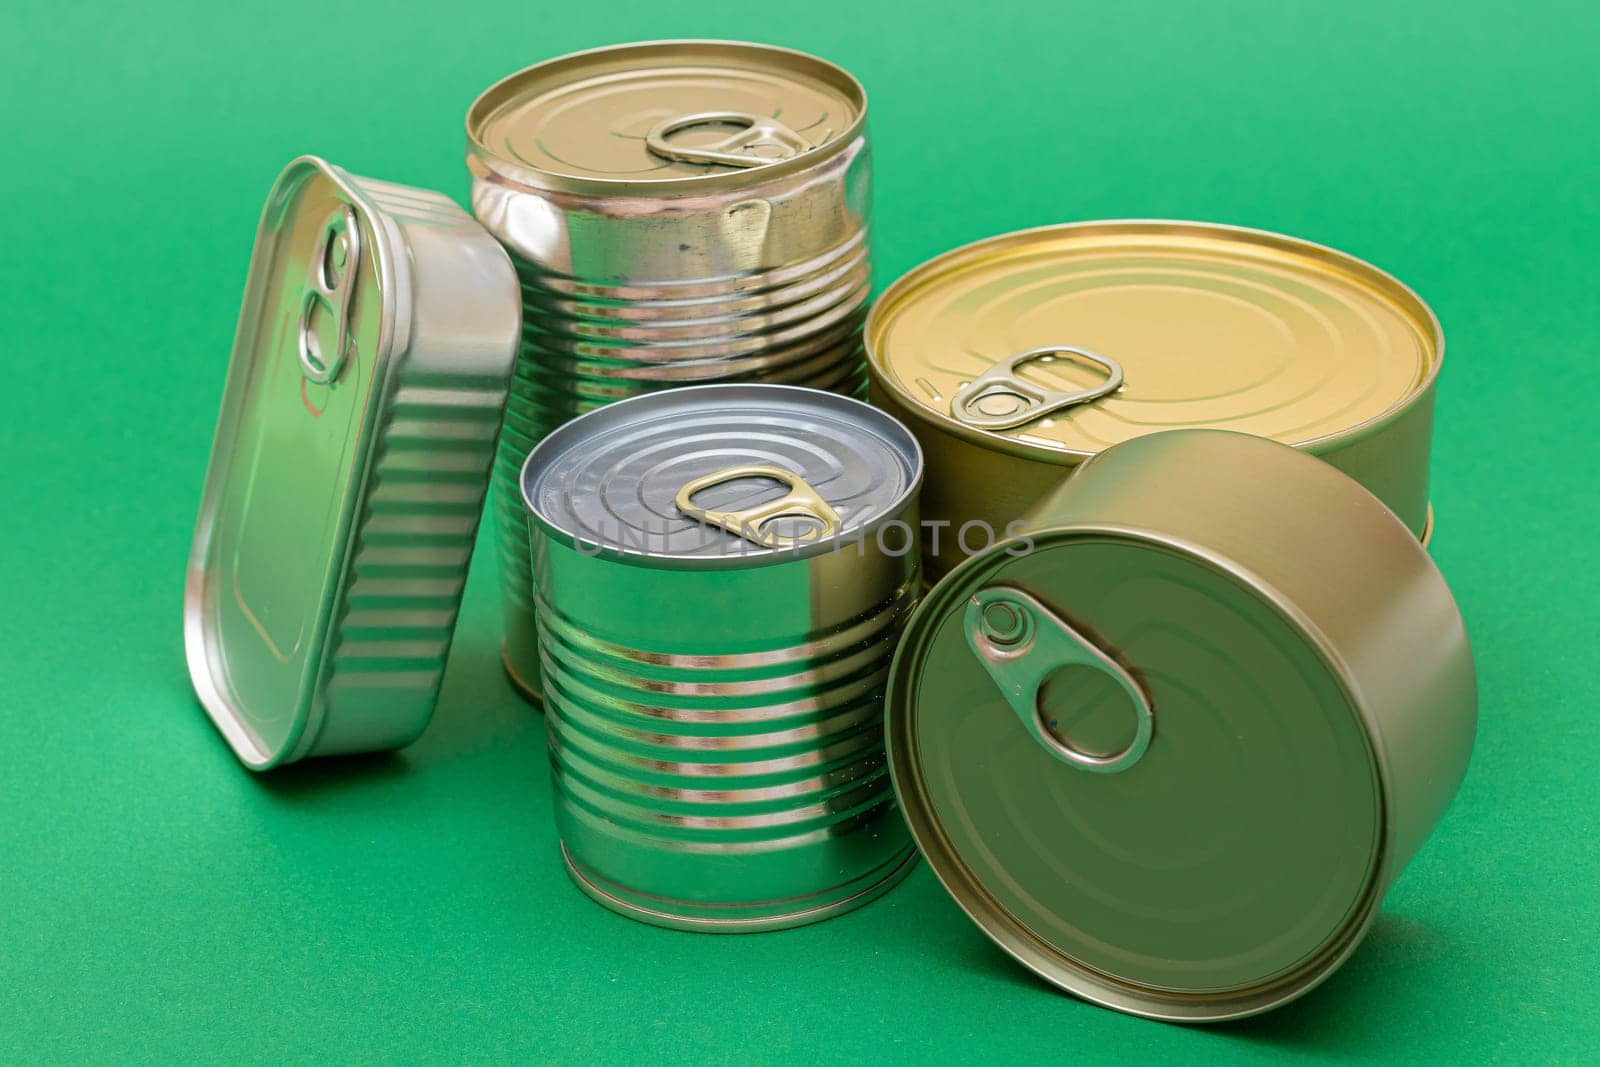 Unopened Tin Cans with Blank Edges on Green Background by InfinitumProdux